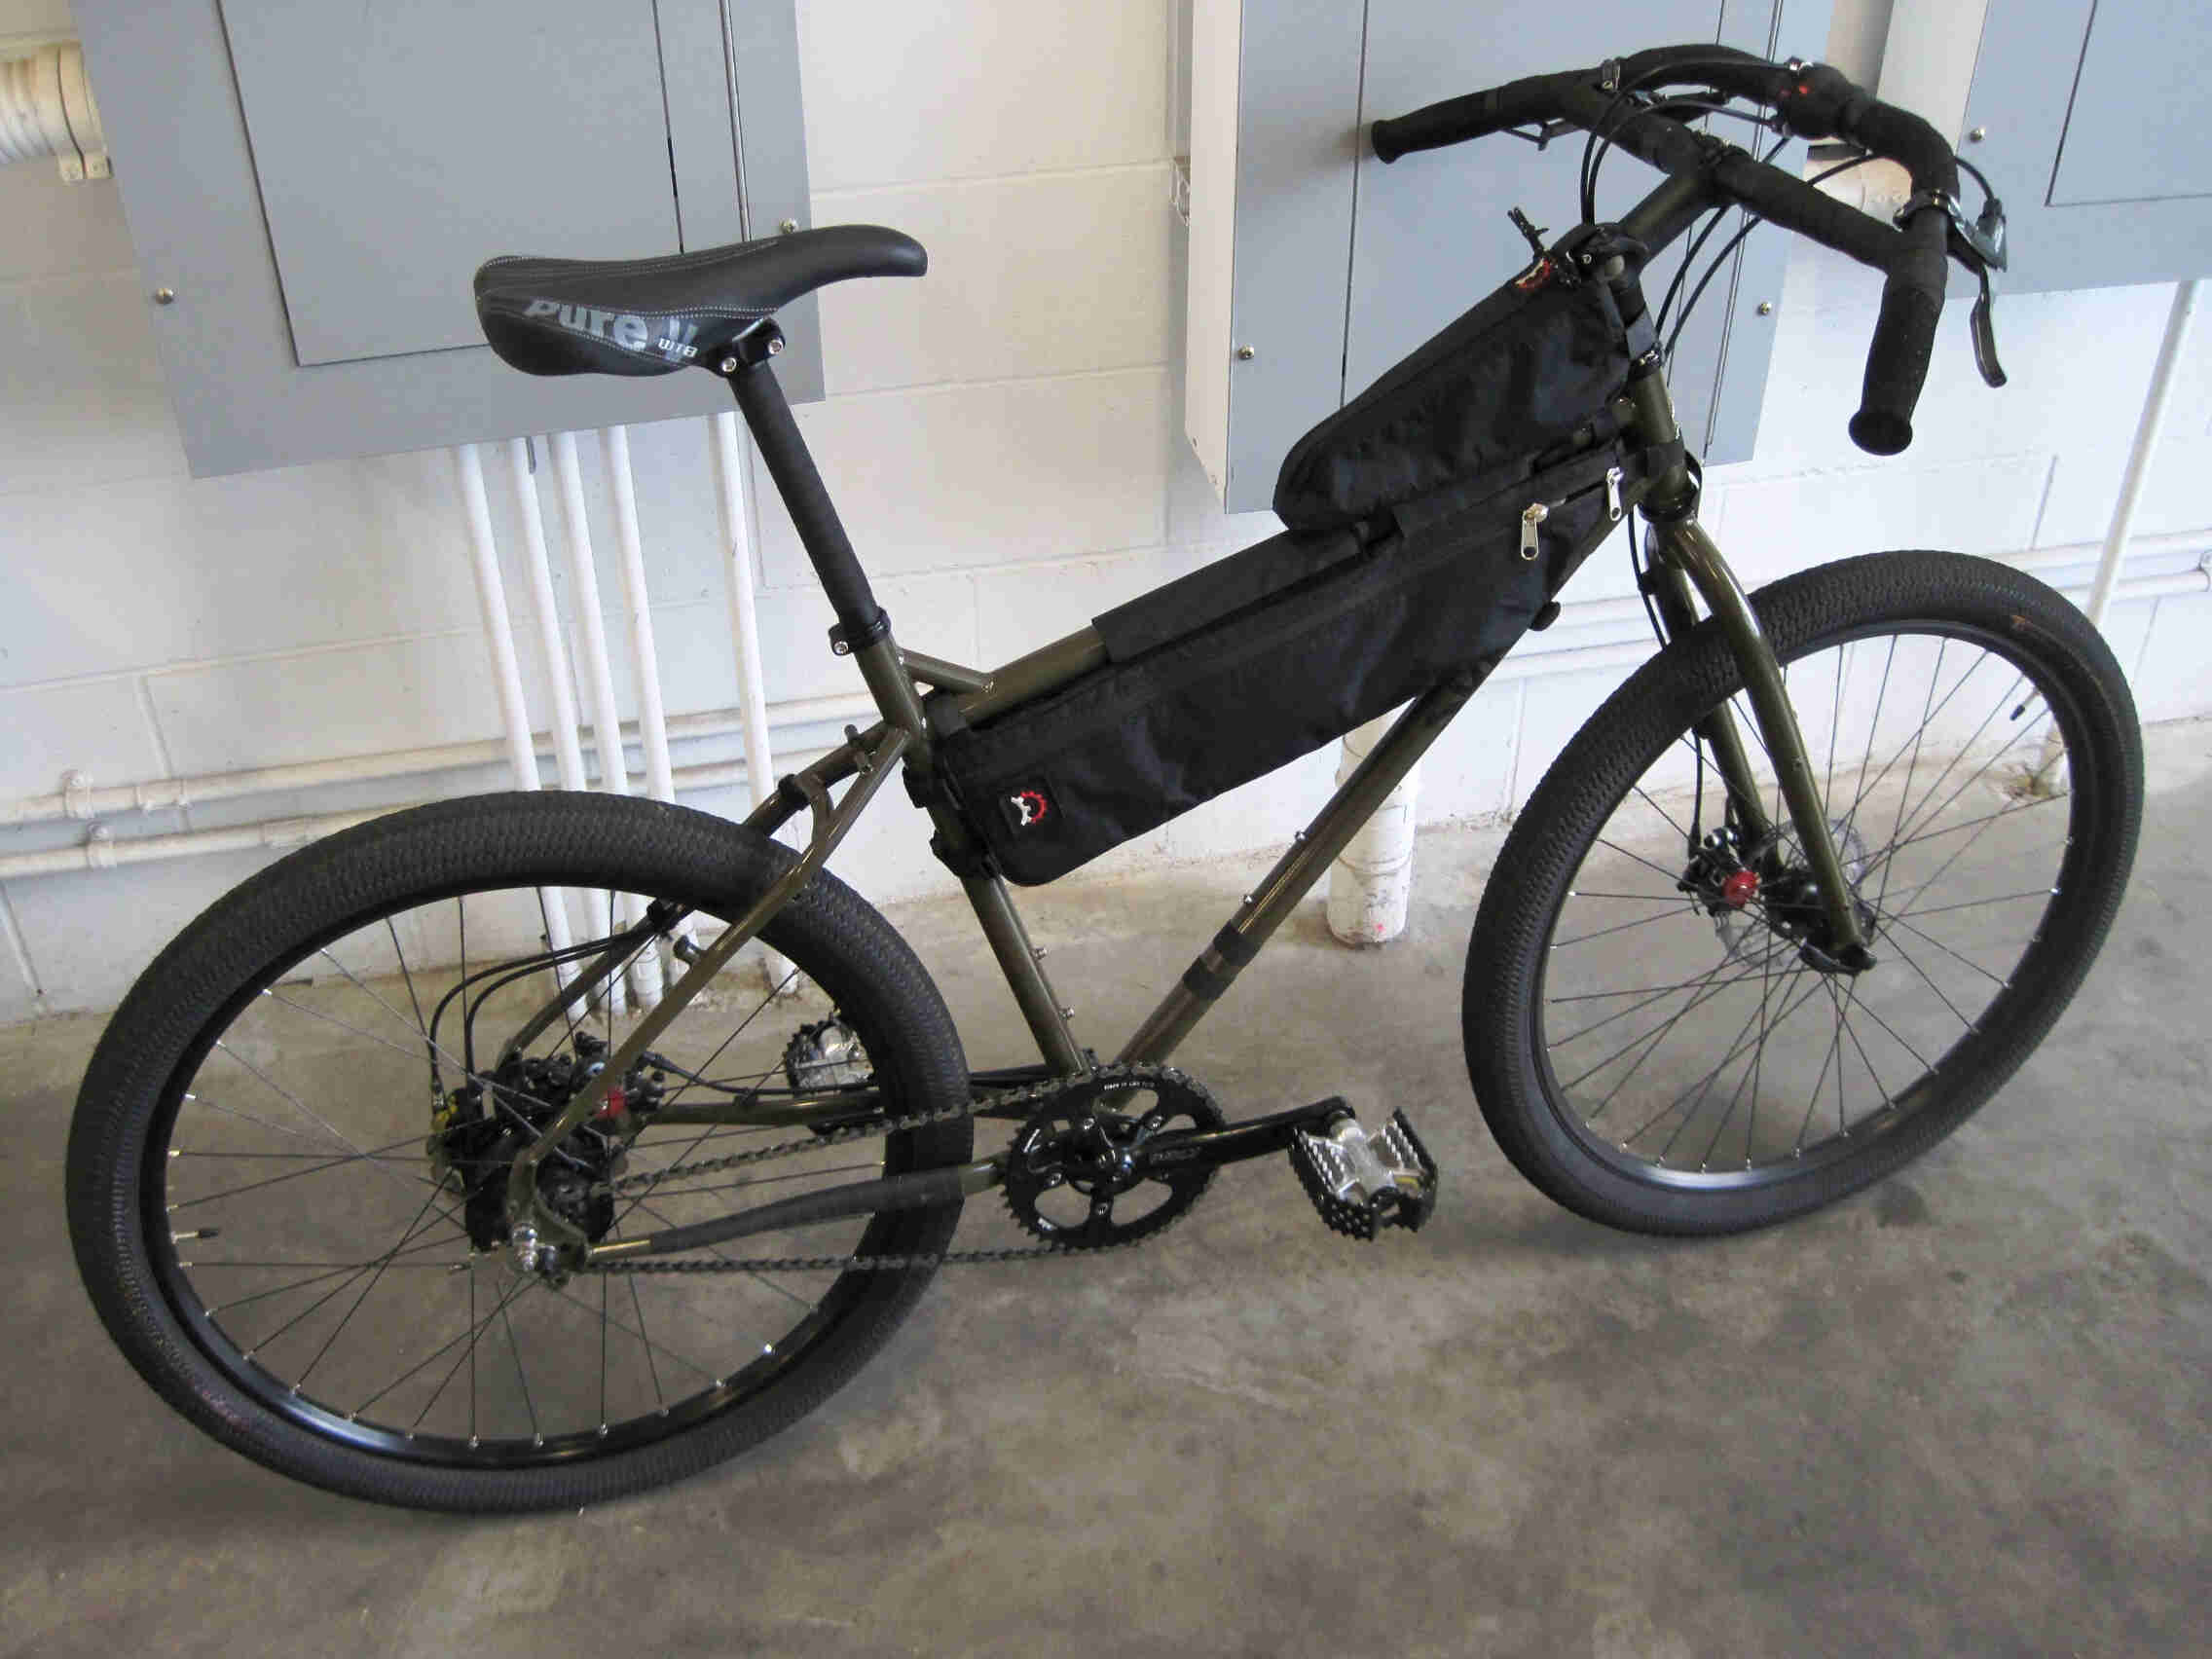 Right side view of a Surly Troll bike with a frame pack, parked on a cement floor, leaning on a wall inside a warehouse